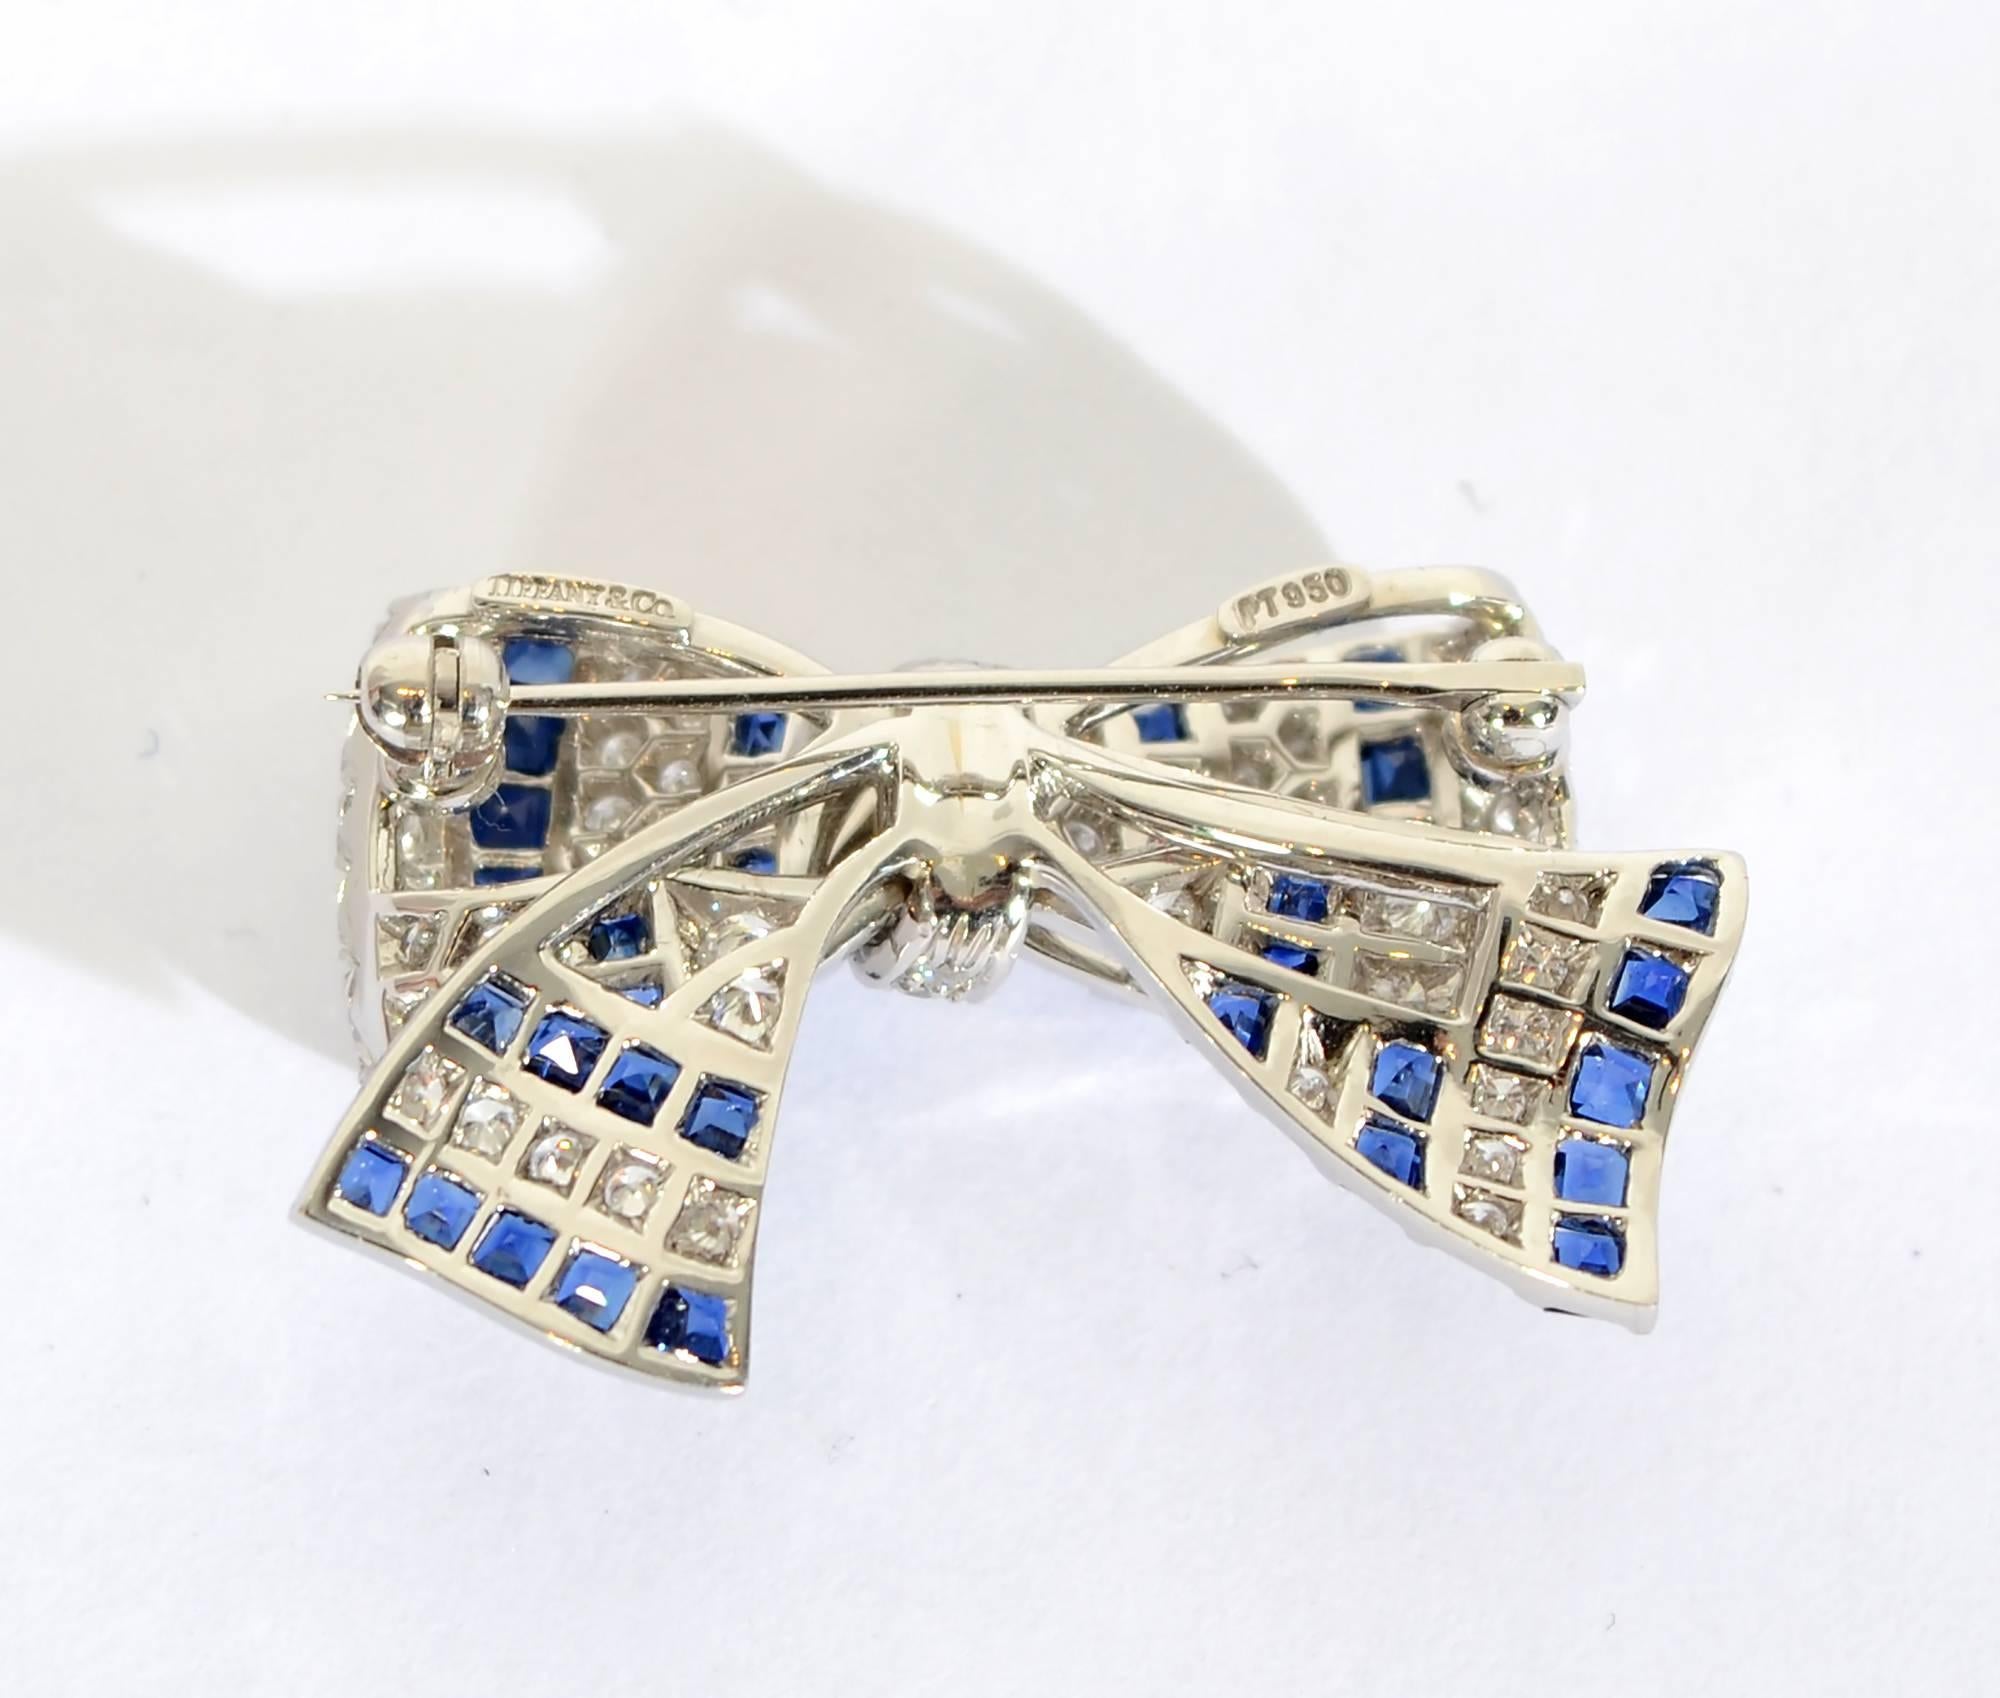 Graceful and elegant bow pin by Tiffany and Co. Natural Burmese sapphires and diamonds are set in platinum. The brooch is finely made to look as though it has the  delicate movement of ribbon. It measures 1 1/4" wide and 7/8" tall.